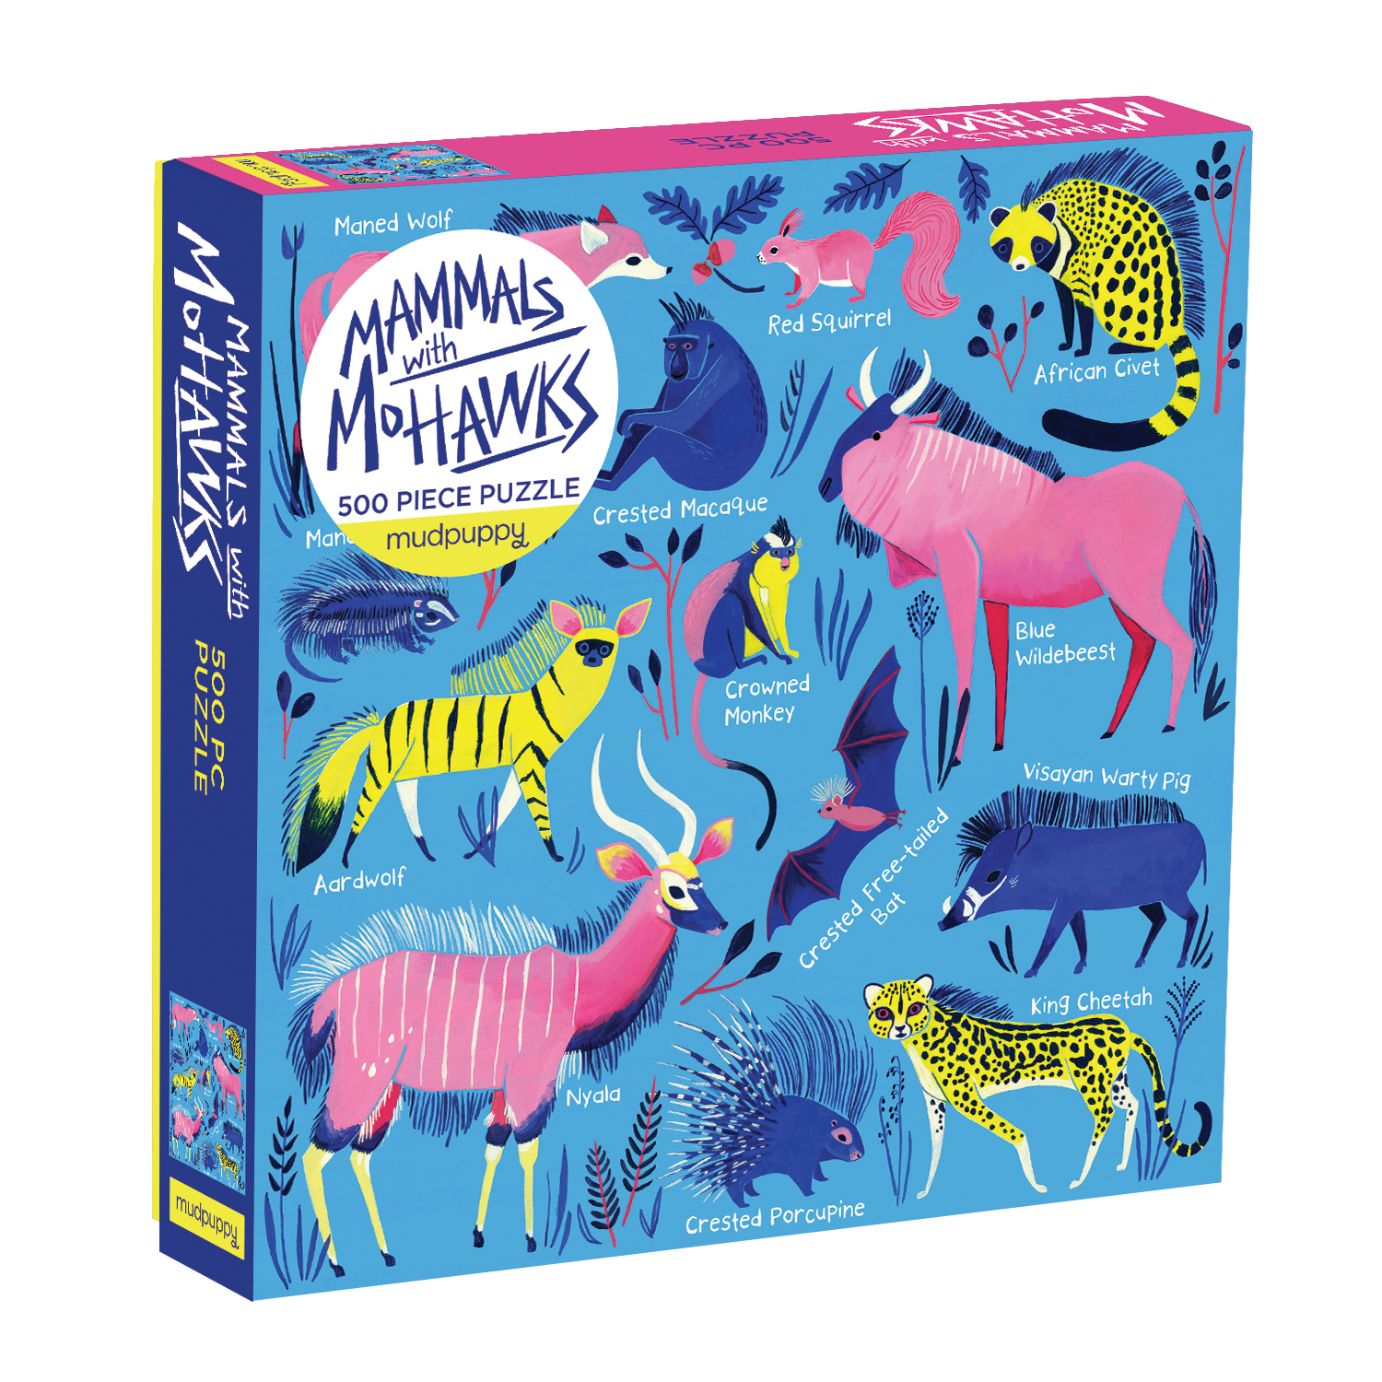 Family Puzzle 500pc Mammals with Mohawks 1212803